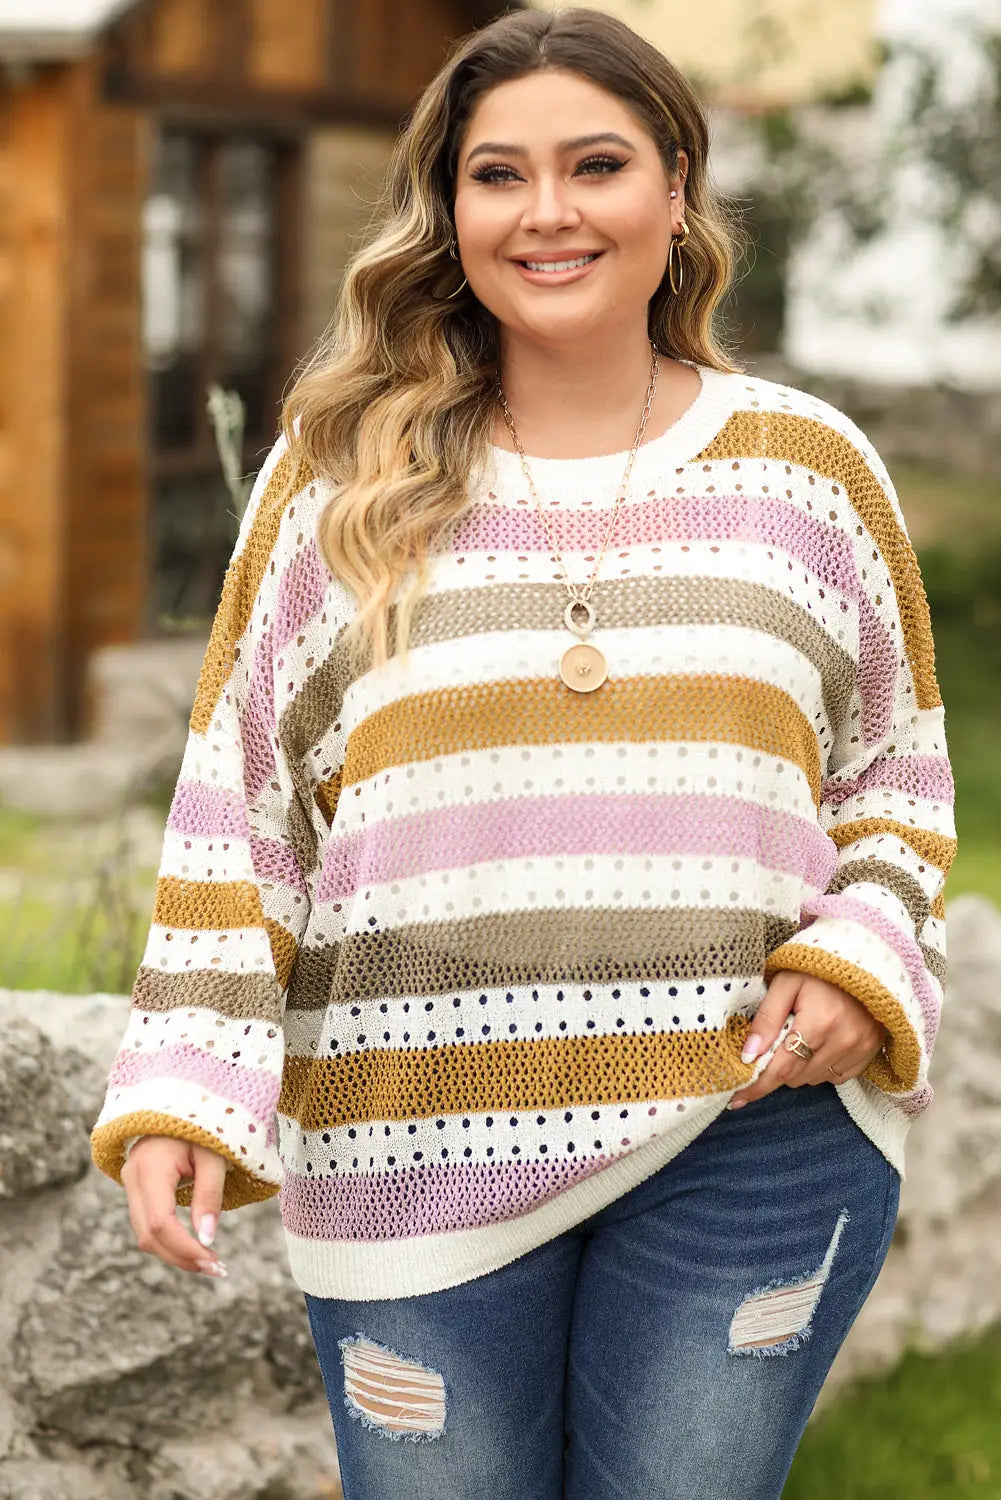 Multicolor striped hollowed knitted loose sweater - 1x / 100% acrylic - tops